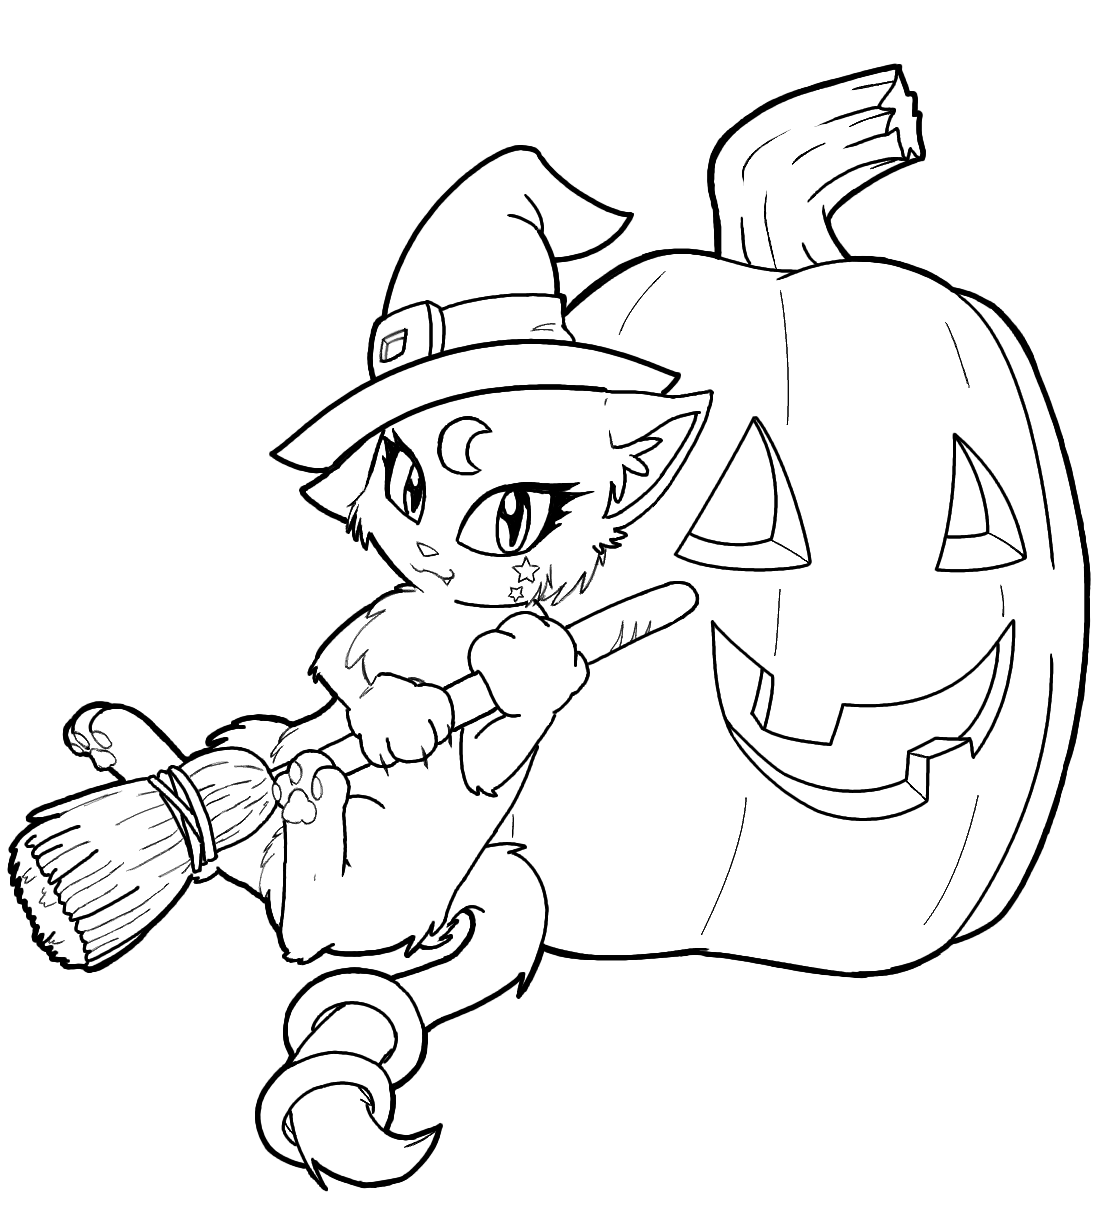 Free printable witch coloring pages for kids witch coloring pages halloween coloring book halloween coloring sheets